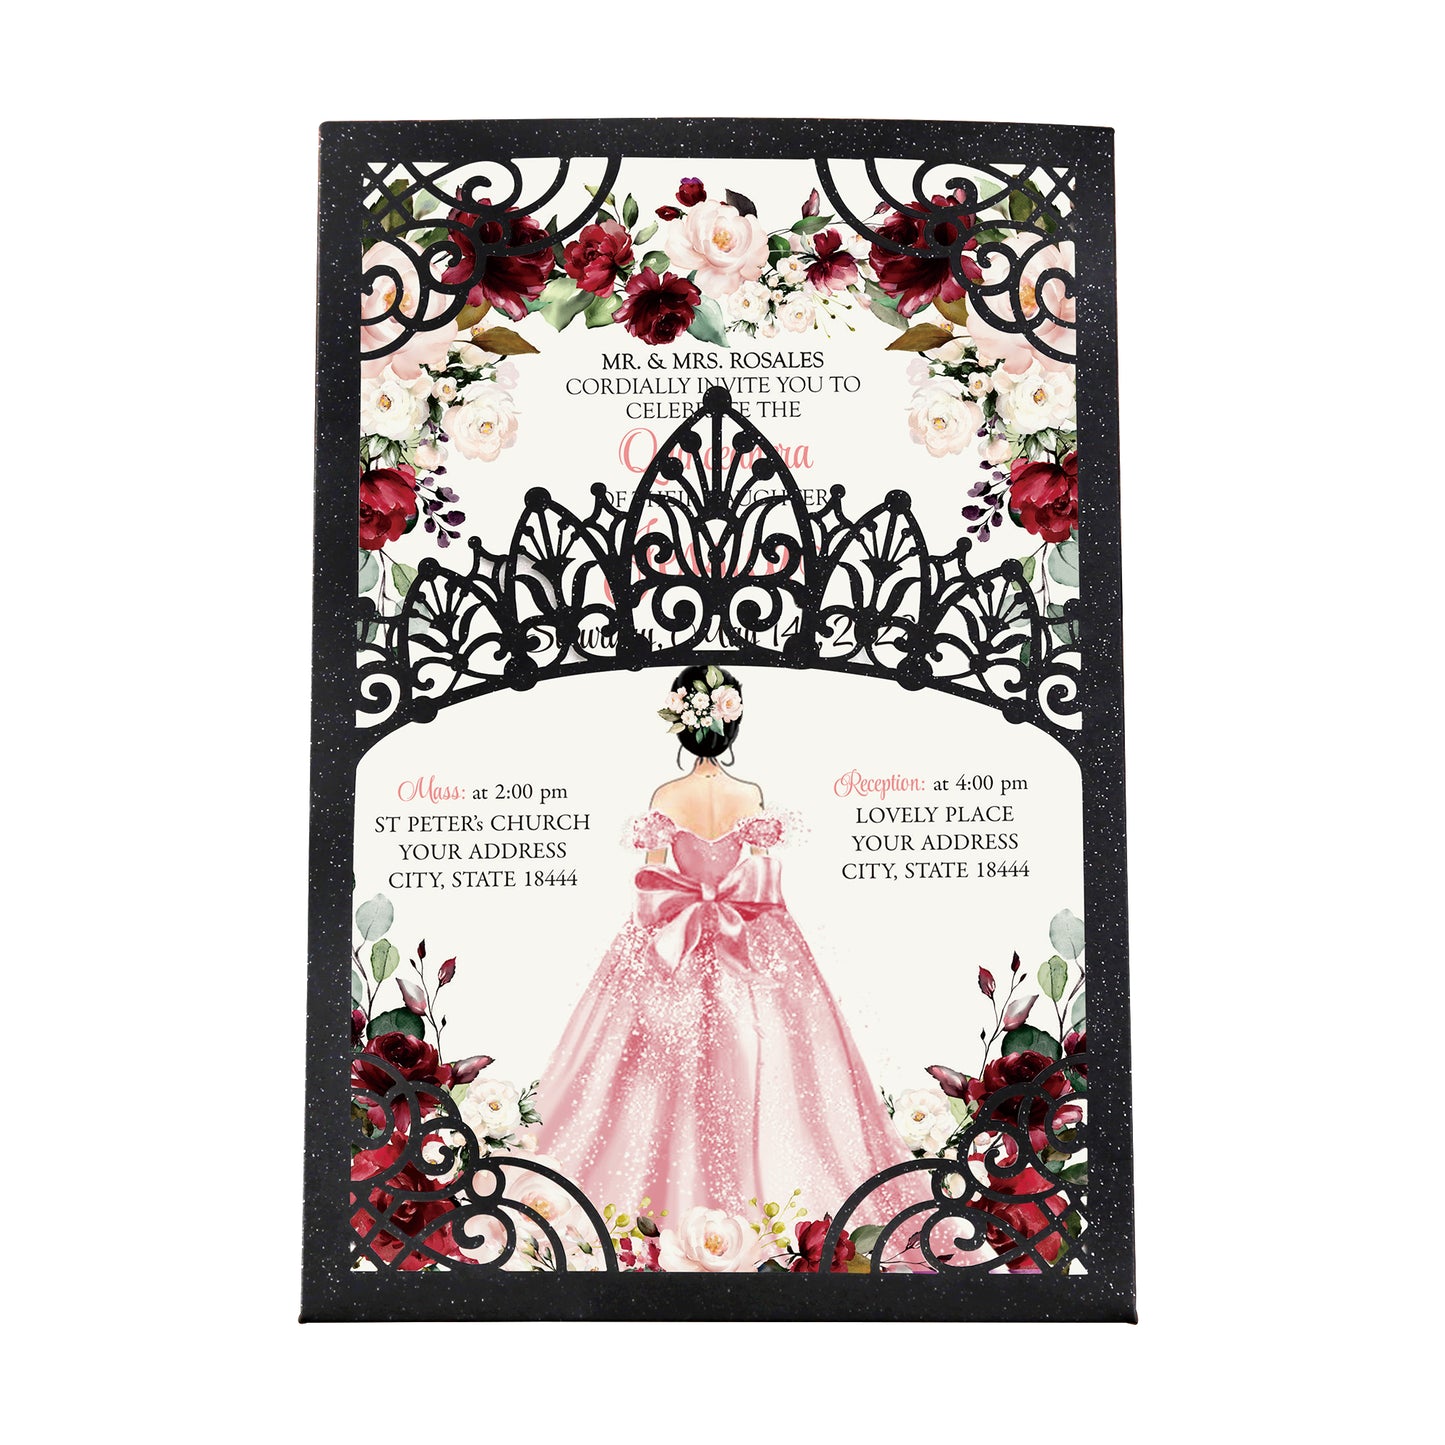 Pearlized Black Invitations Purple Greeting Cards For Quinceanera